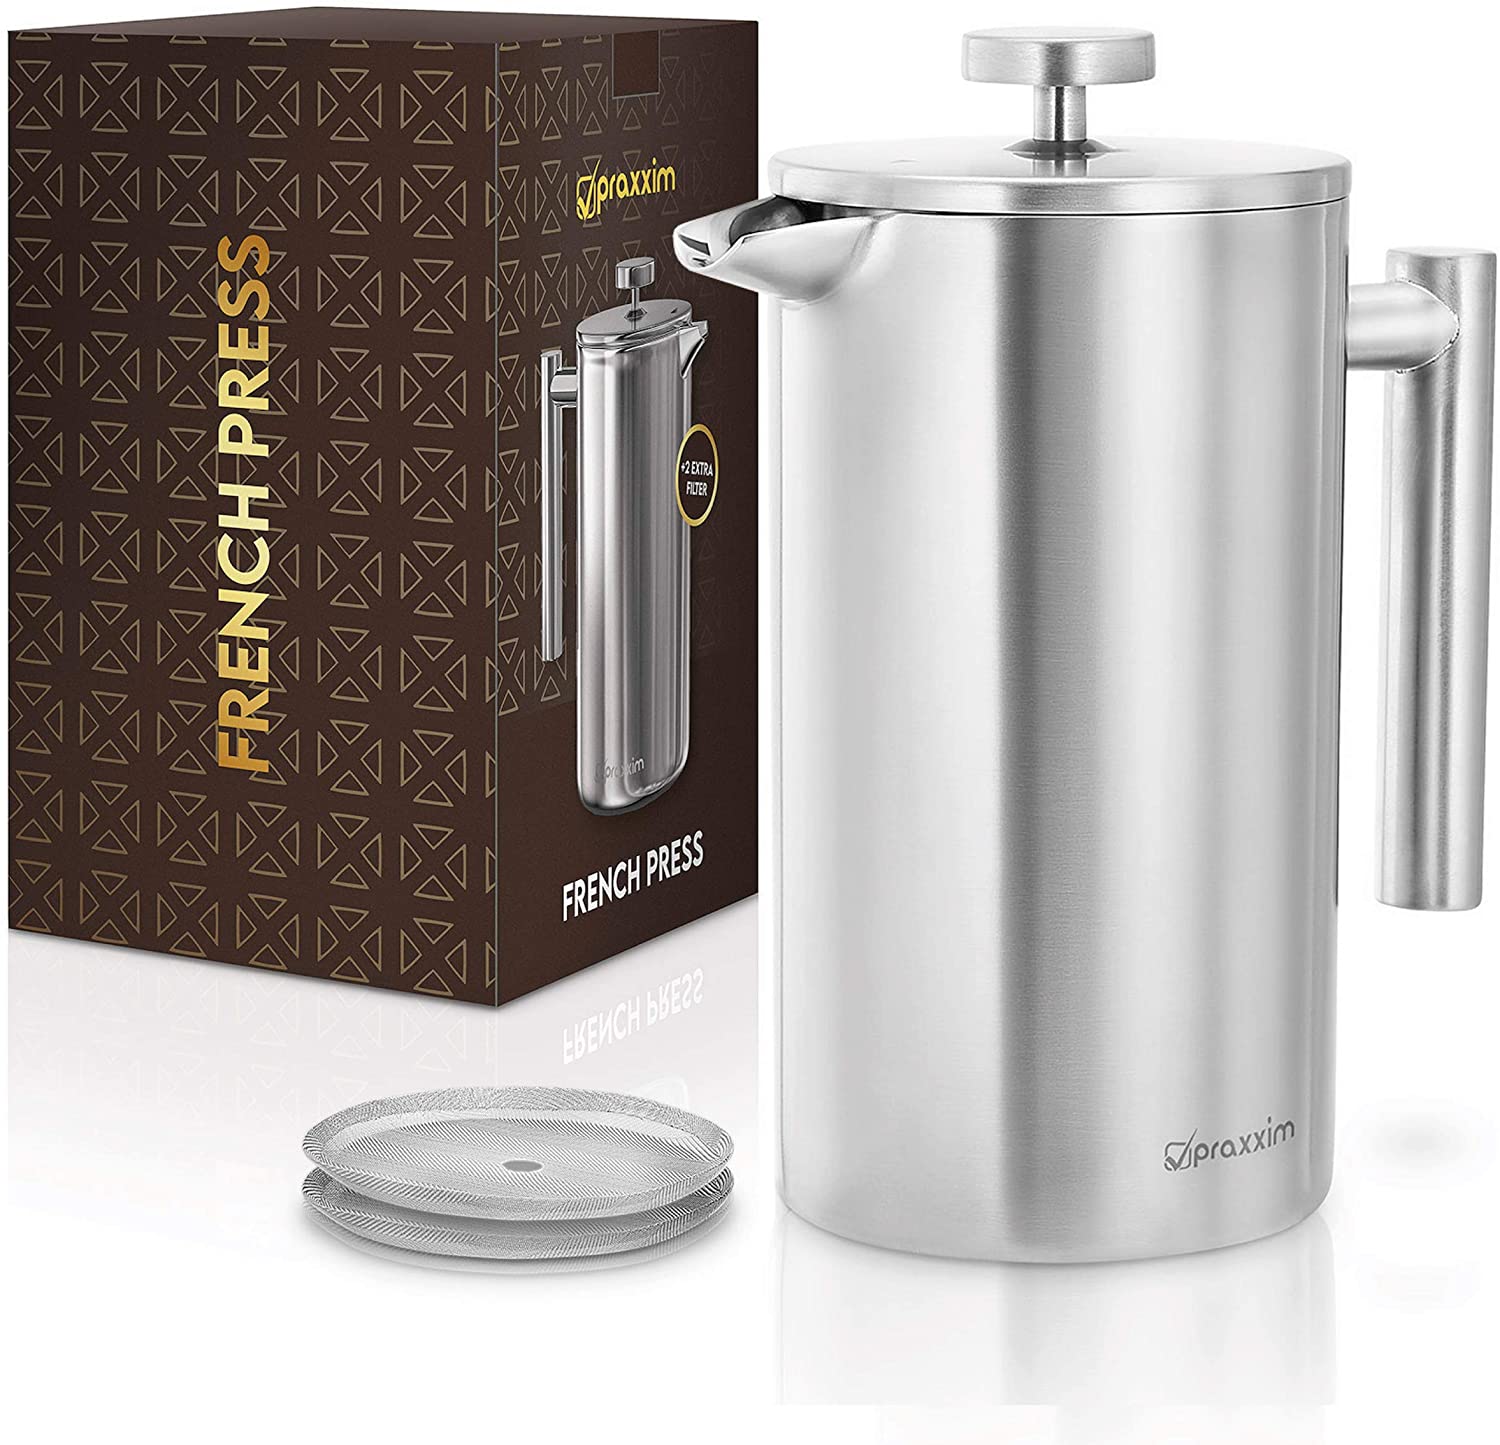 praxxim French Press Stainless Steel 1L - Sturdy Coffee Maker for Home, Travel, Camping - Double-Walled Coffee Press for Longer Warming (1 Litre)